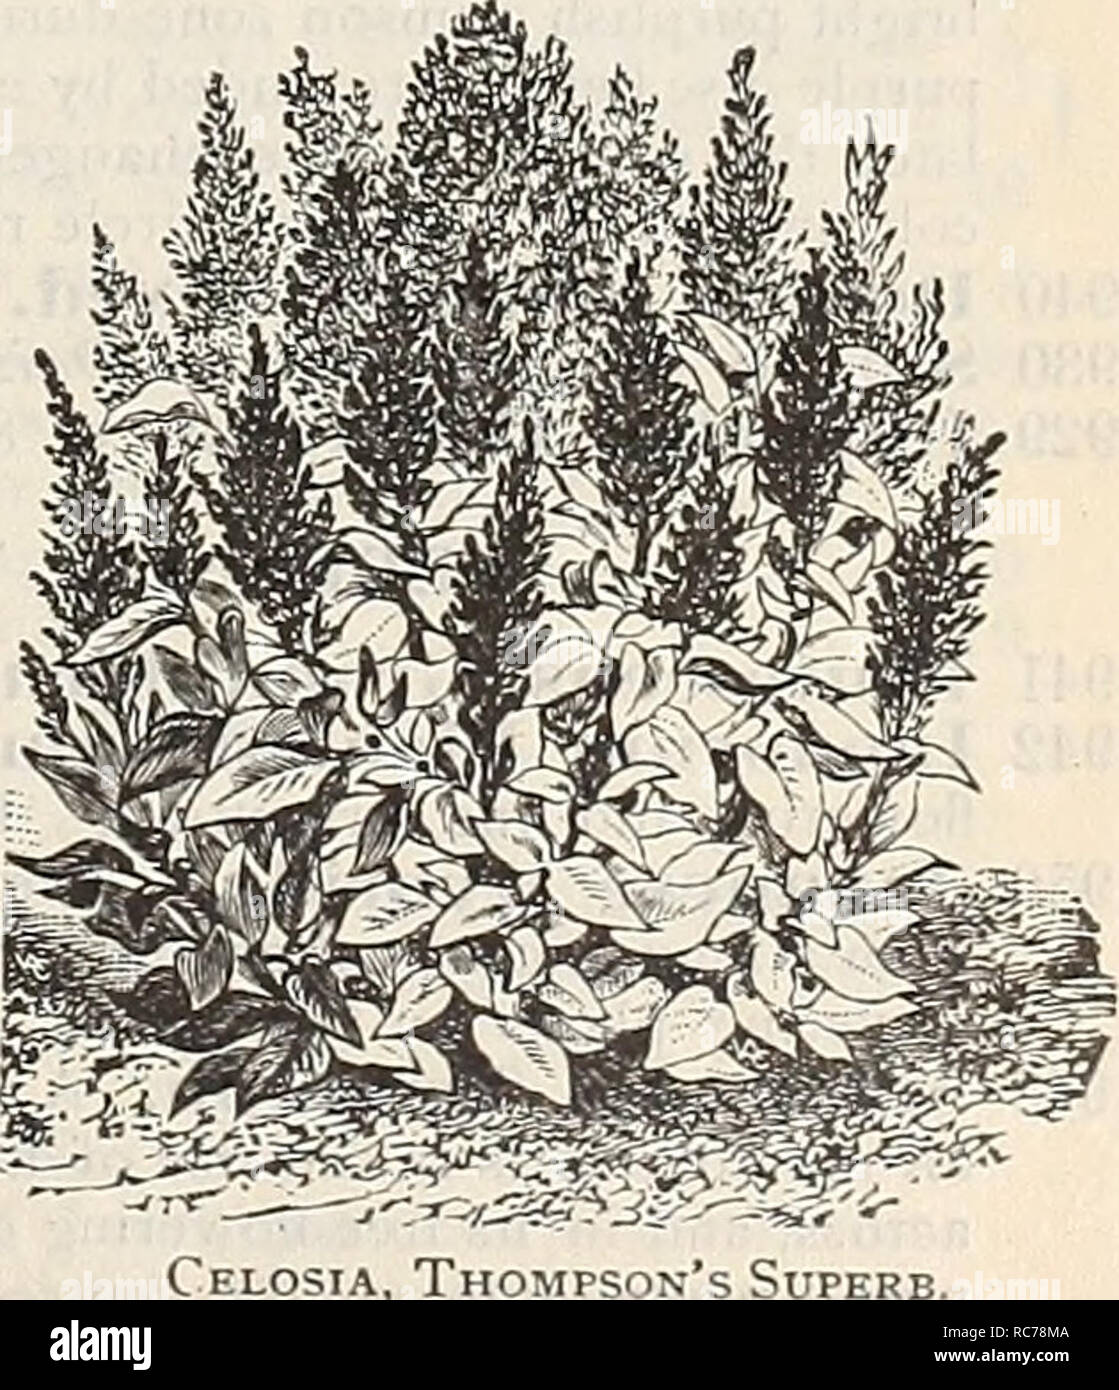 . Dreer's garden calendar : 1900. Seeds Catalogs; Nursery stock Catalogs; Gardening Equipment and supplies Catalogs; Flowers Seeds Catalogs; Vegetables Seeds Catalogs; Fruit Seeds Catalogs. Celosia. Glas Prize Eeatliered Varieties. Make fine plants for large beds or groups, and the plumes or flowers can be cut and dried for winter bouquets. 1867 T li o ni p s o n 's Superb ( Triomplie de /' Exposition^. This variety has attracted general attention in the public gardens of Paris. Pyramidal in growth, at- taining a height of a little more than 2 feet, nnd produces beau- tiful large spikes of the Stock Photo